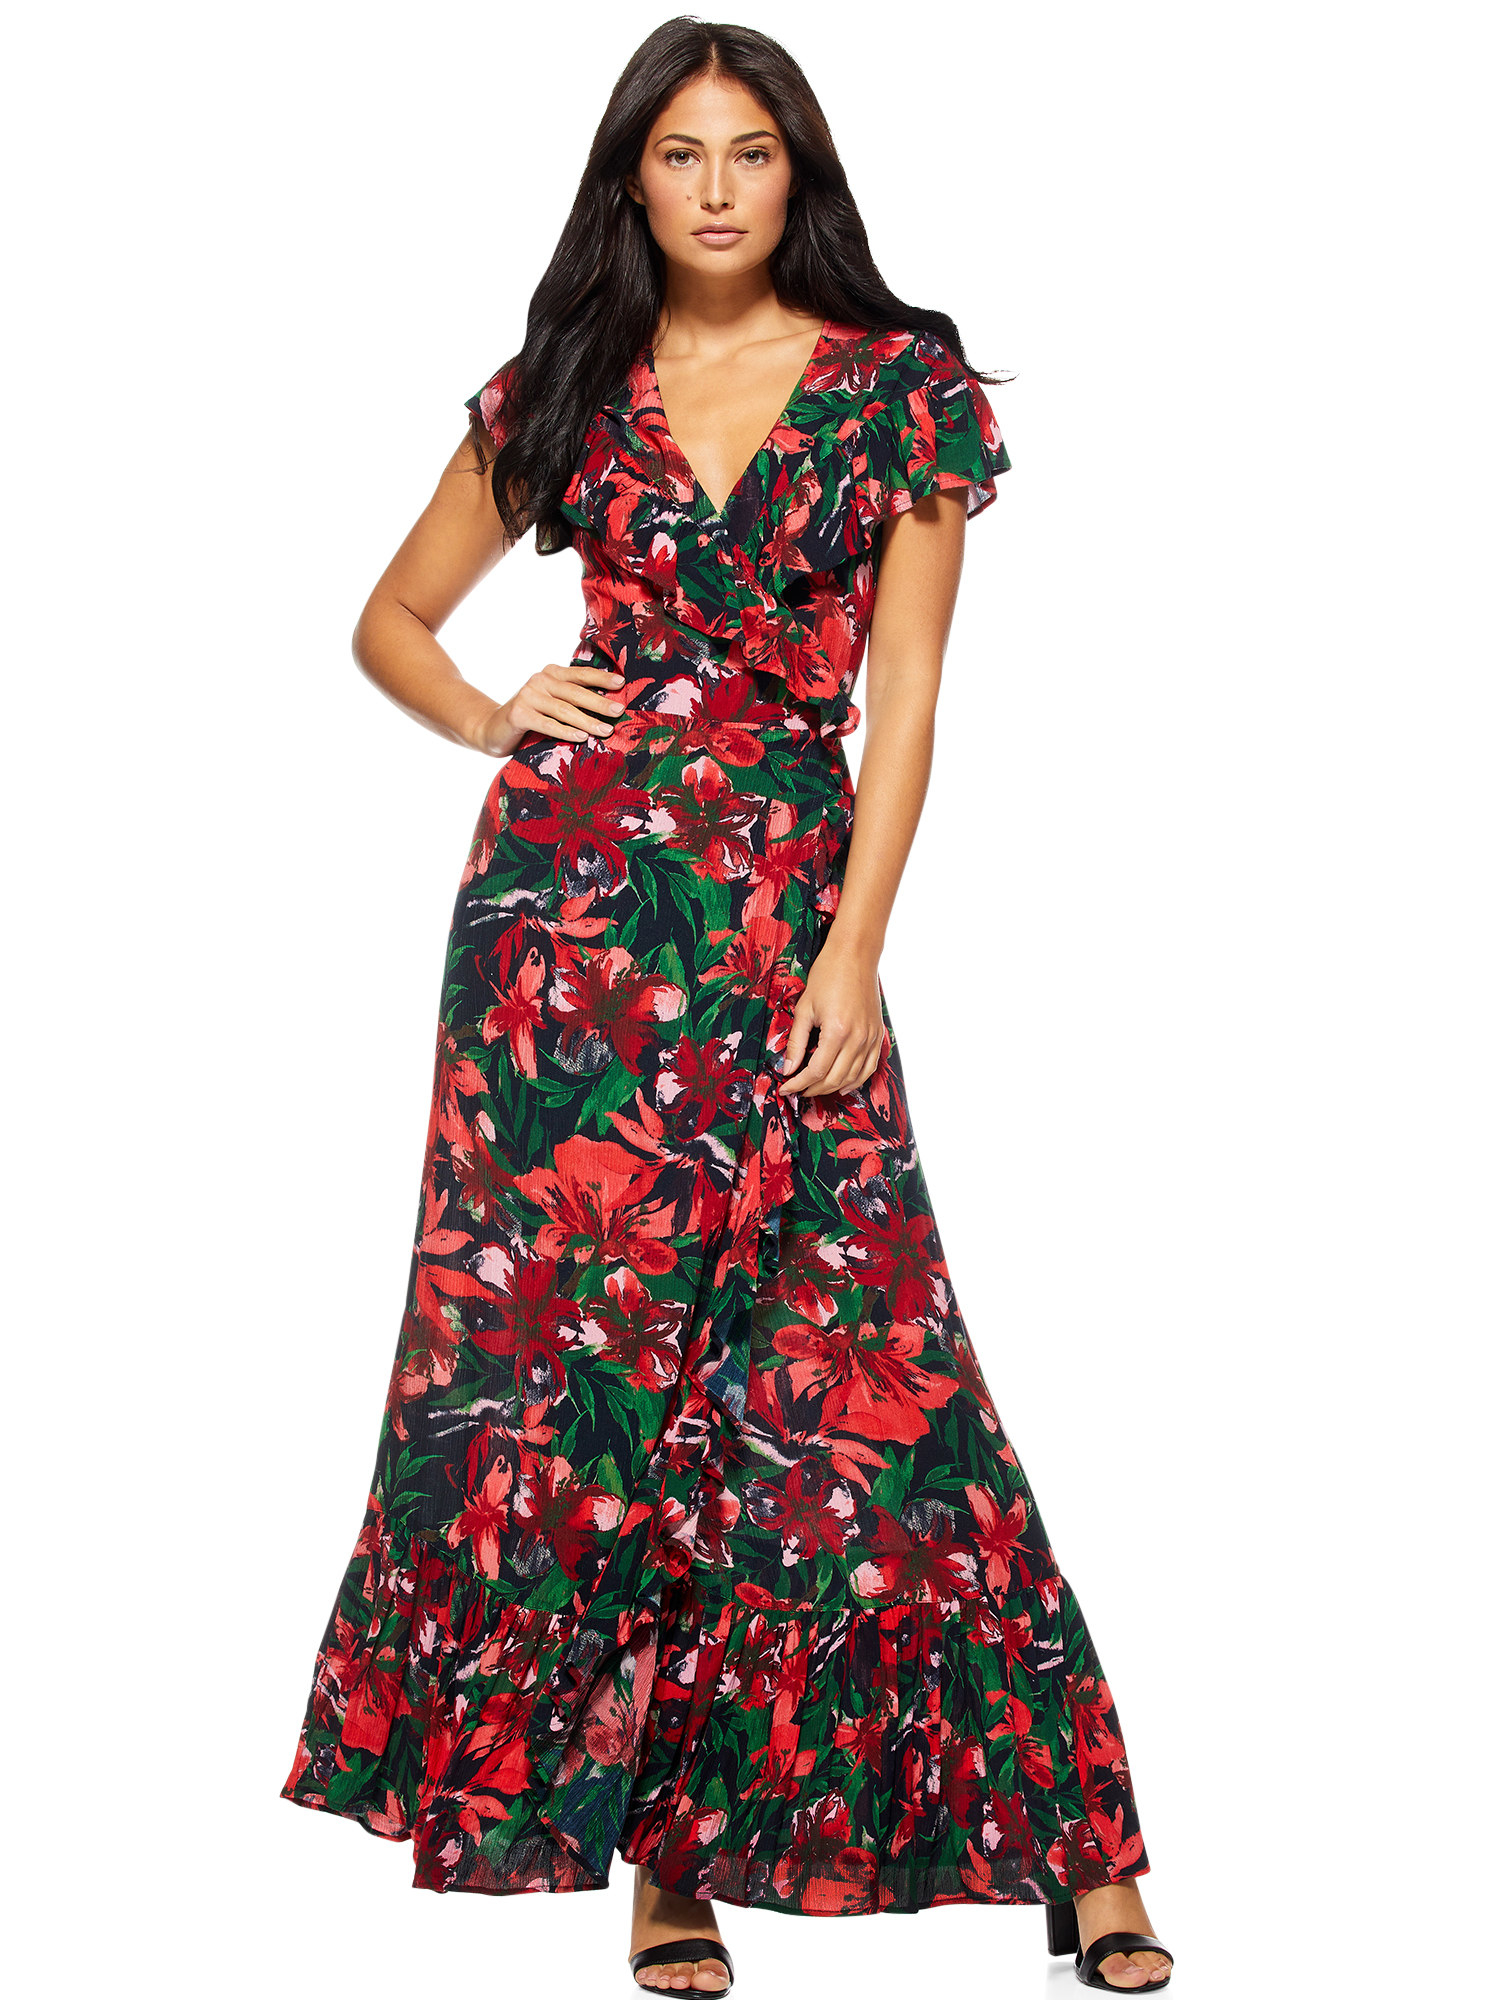 The red, black, and green floral-printed short sleeve maxi dress